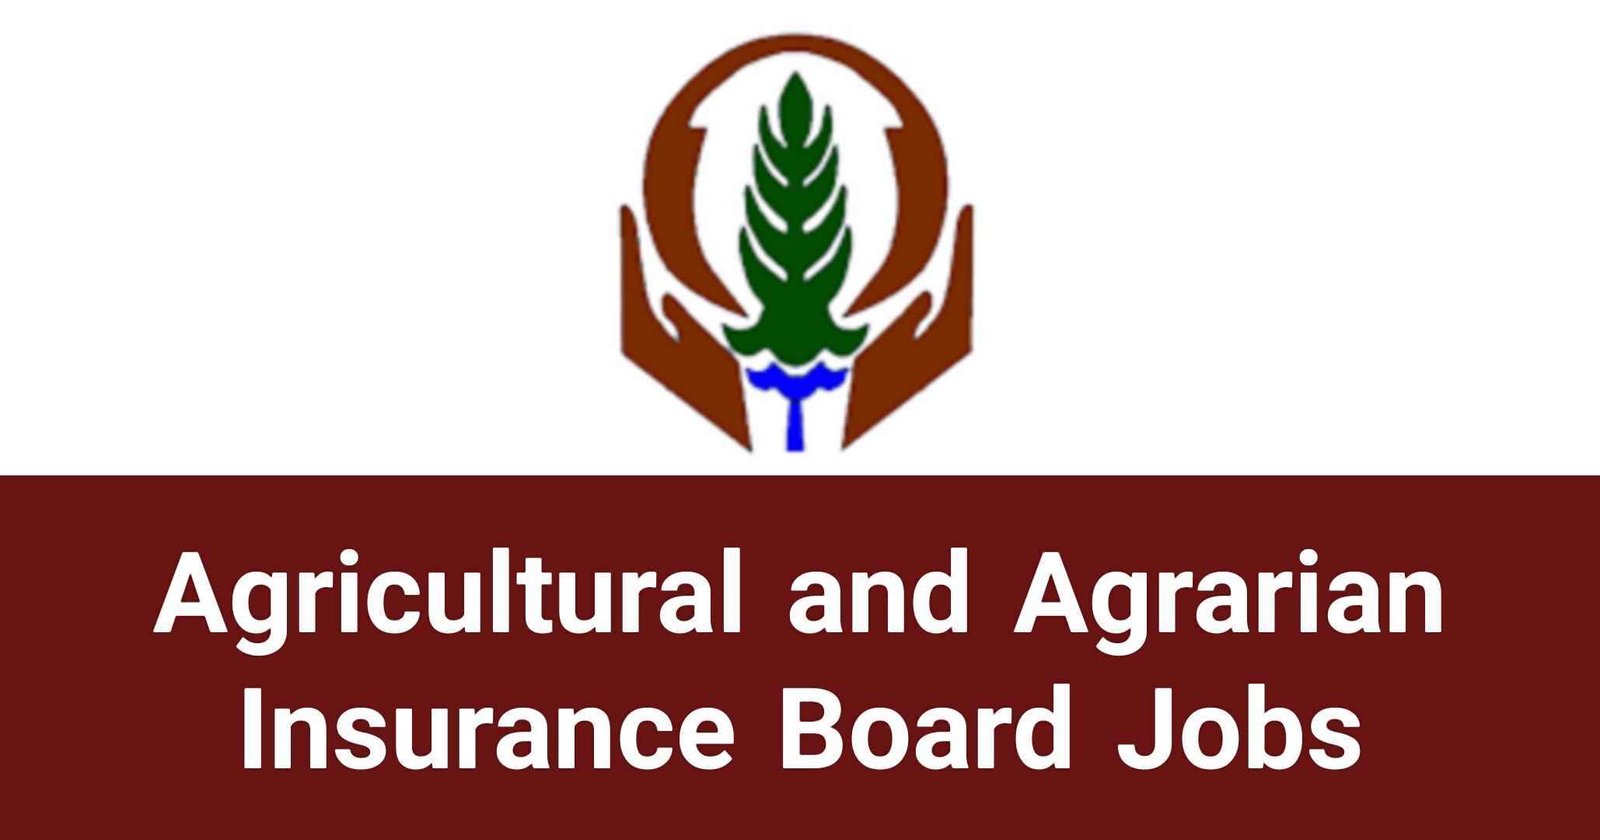 Agricultural and Agrarian Insurance Board Jobs Vacancies Applications